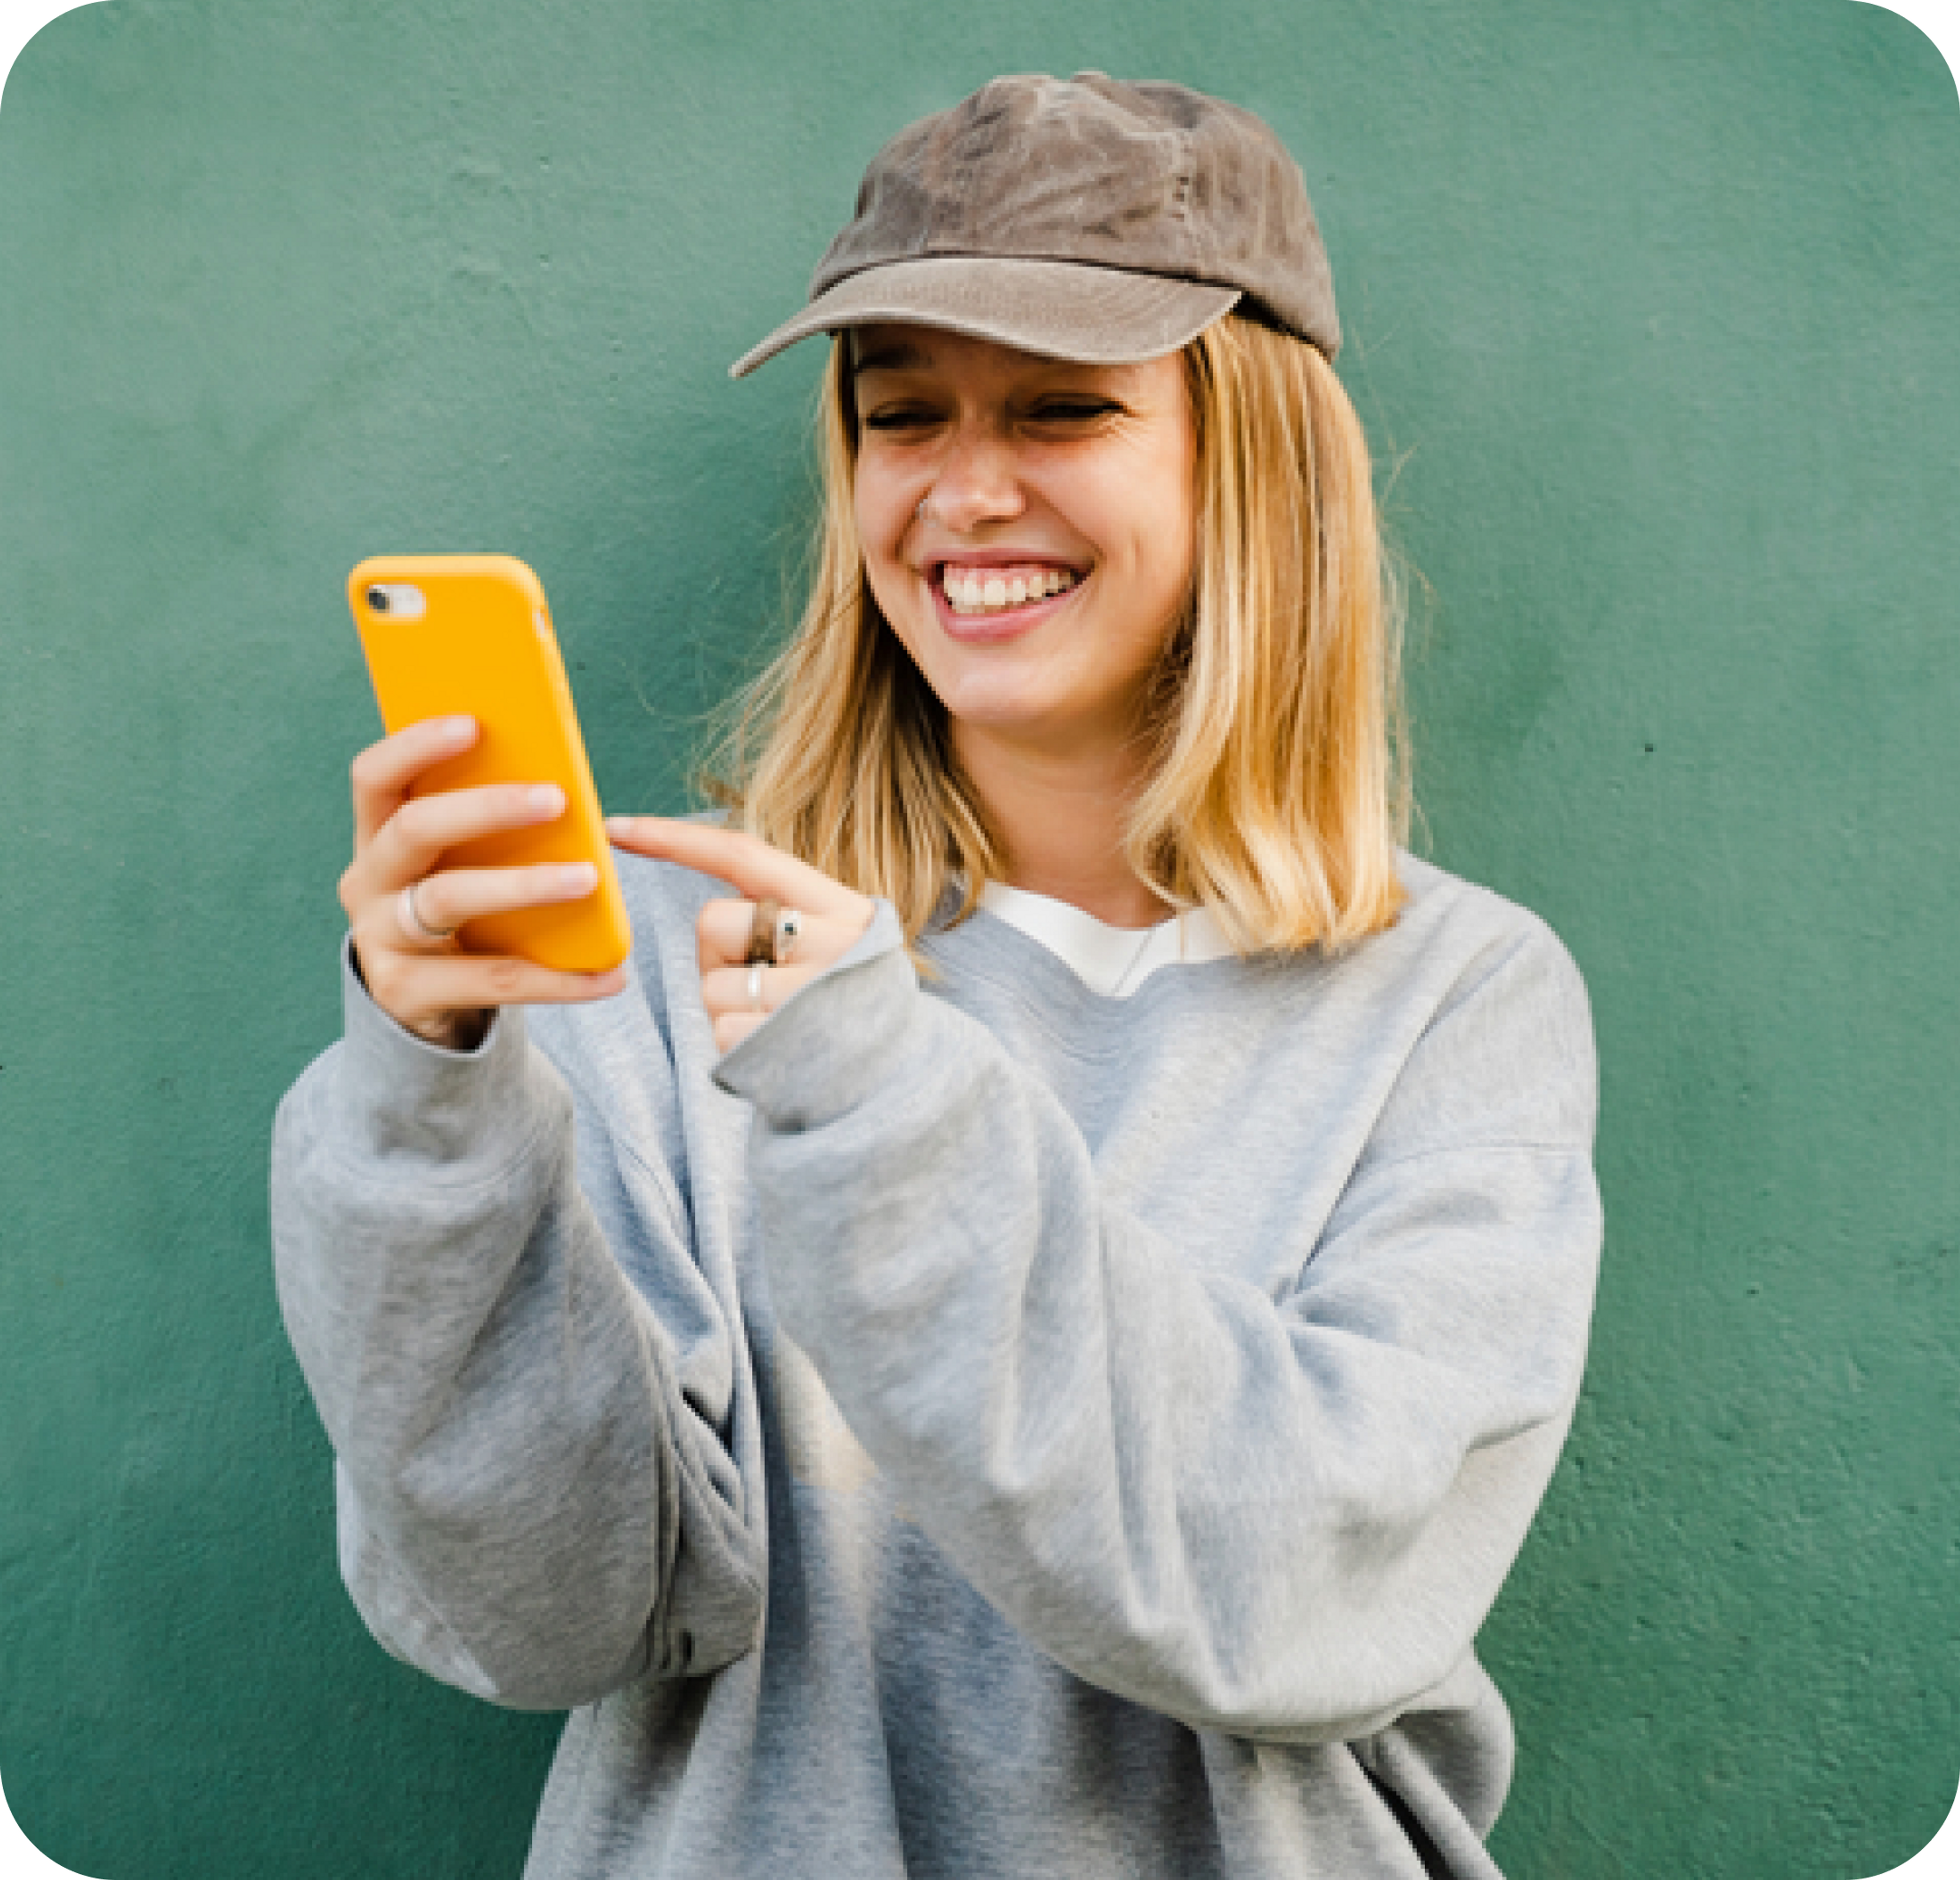 A photo of a woman smiling while looking at a phone